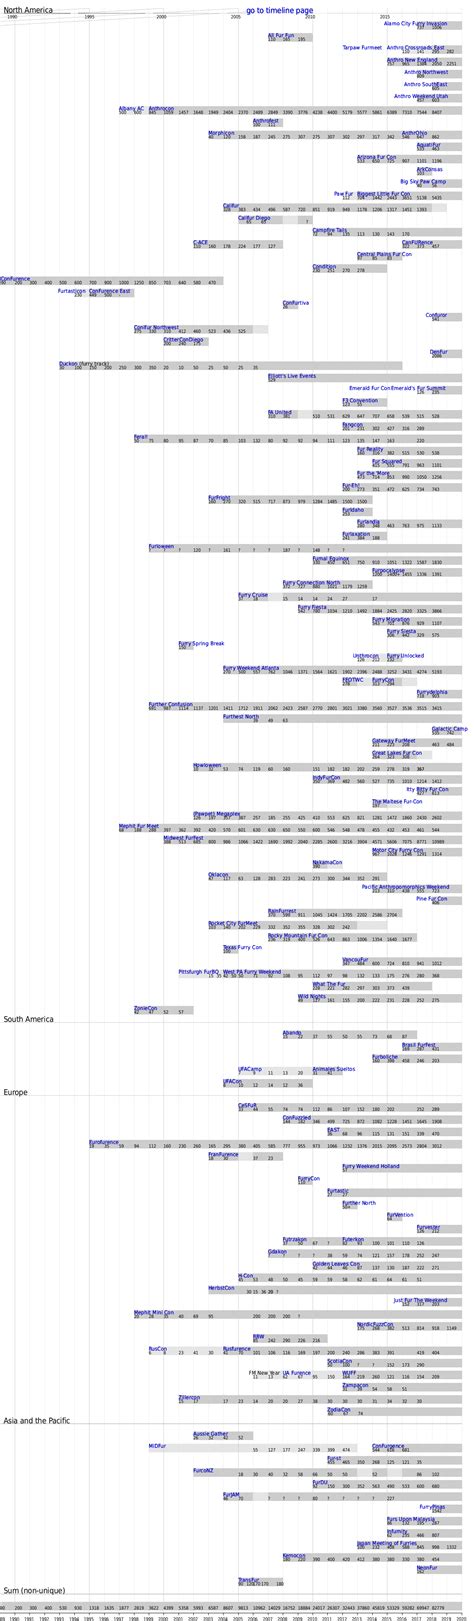 Timeline Of Furry Conventions Wikifur The Furry Encyclopedia